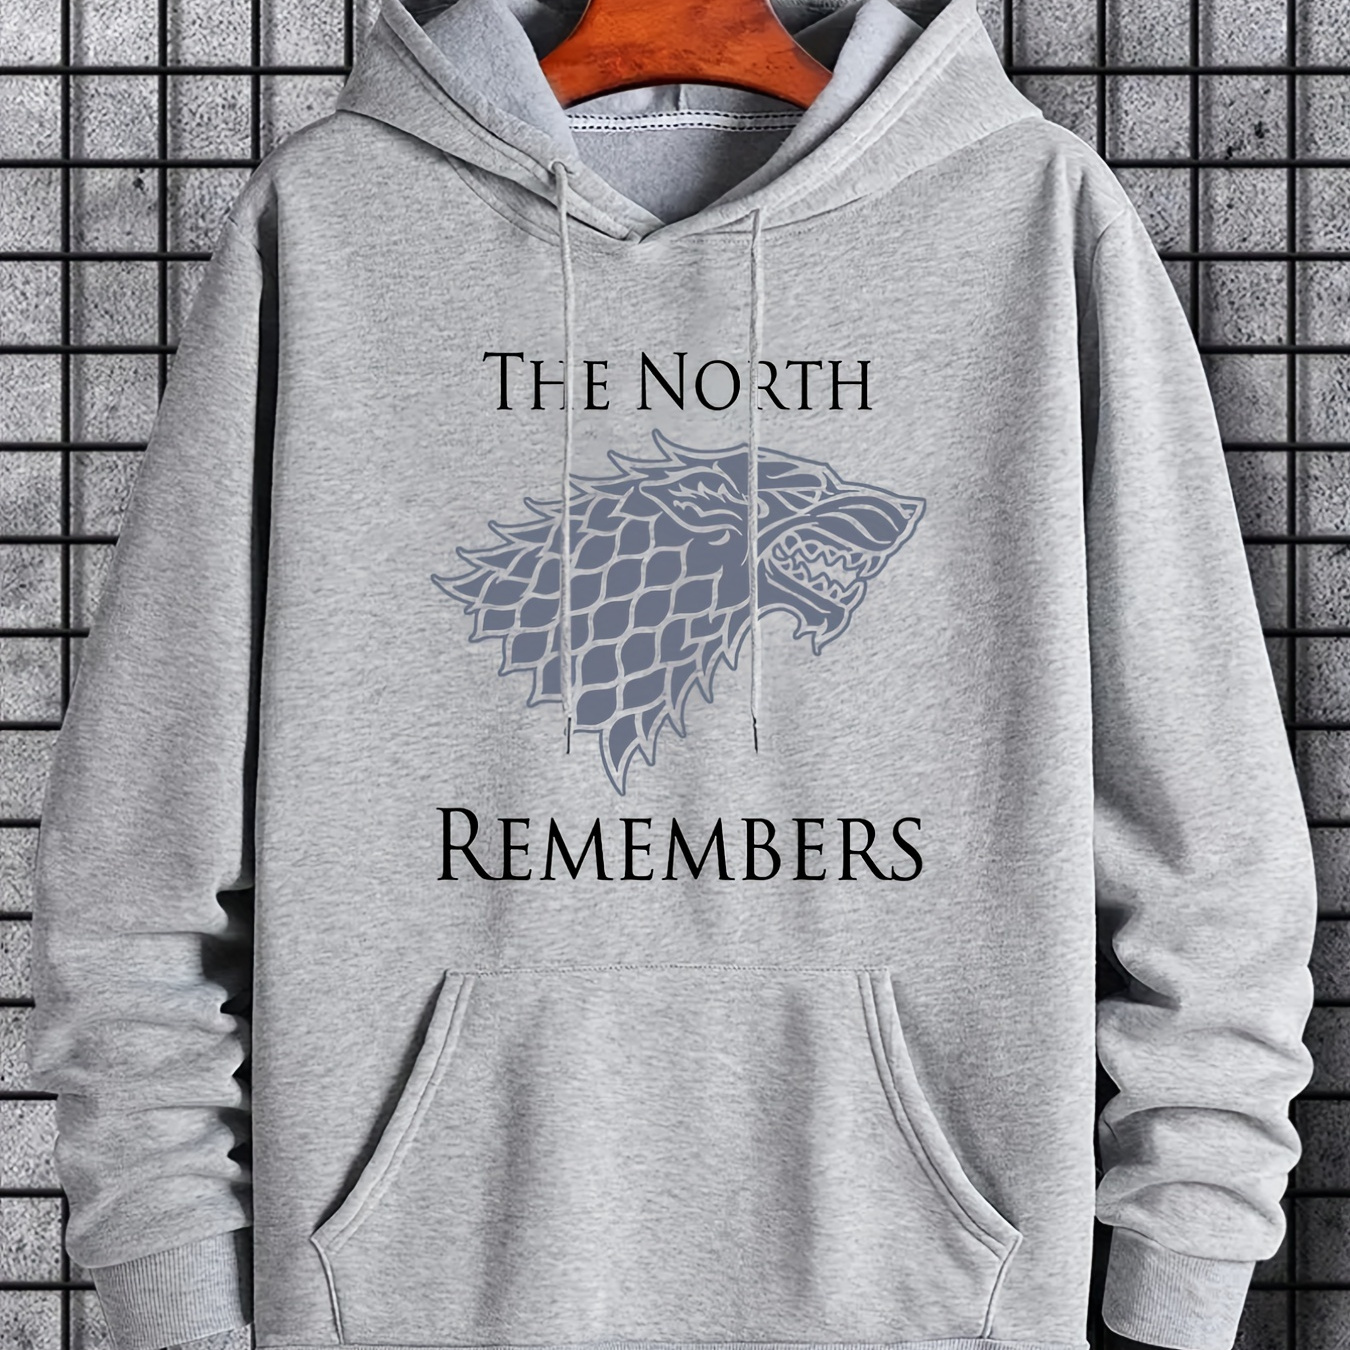 

Hoodies For Men, 'remember The North' Graphic Hoodie, Men’s Casual Pullover Hooded Sweatshirt With Kangaroo Pocket For Spring Fall, As Gifts